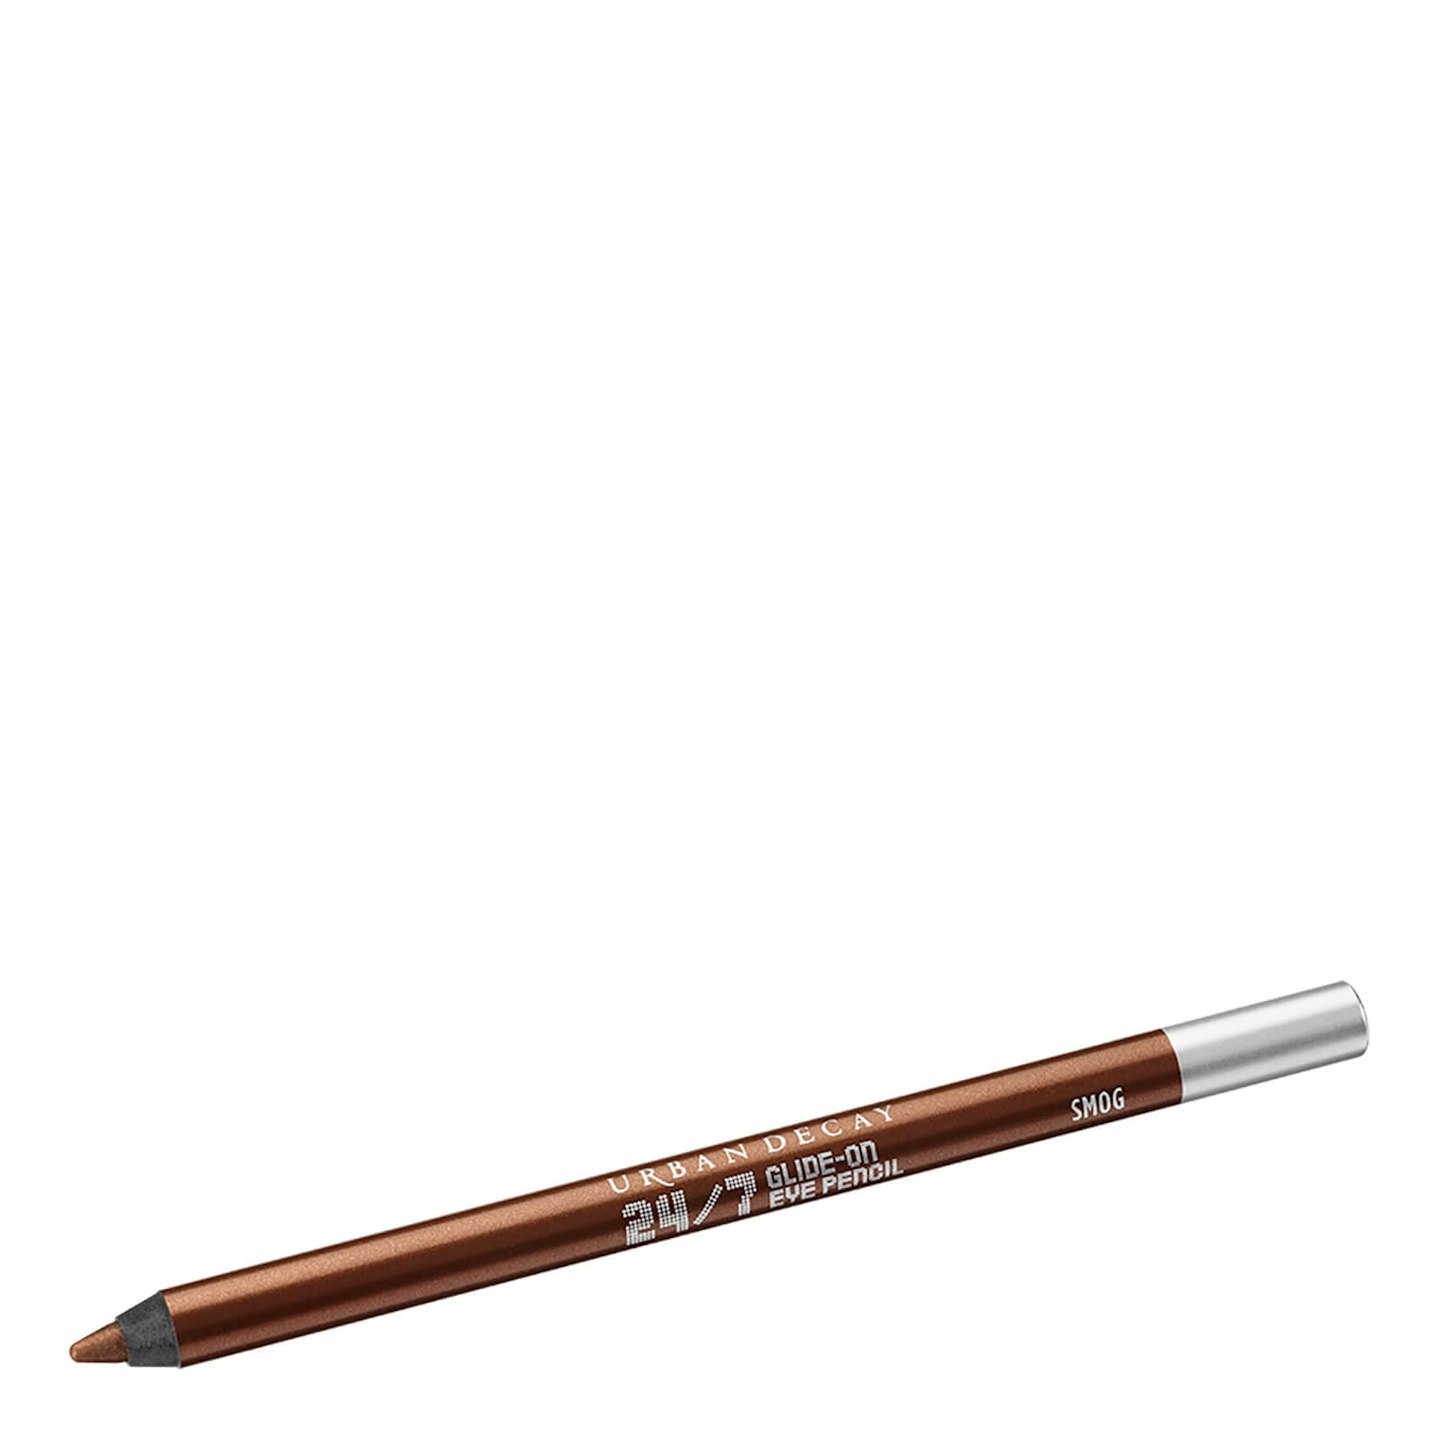 Look 4: Why Not Try - Urban Decay 24/7 Glide On Eye Pencil in Smog, £15.50